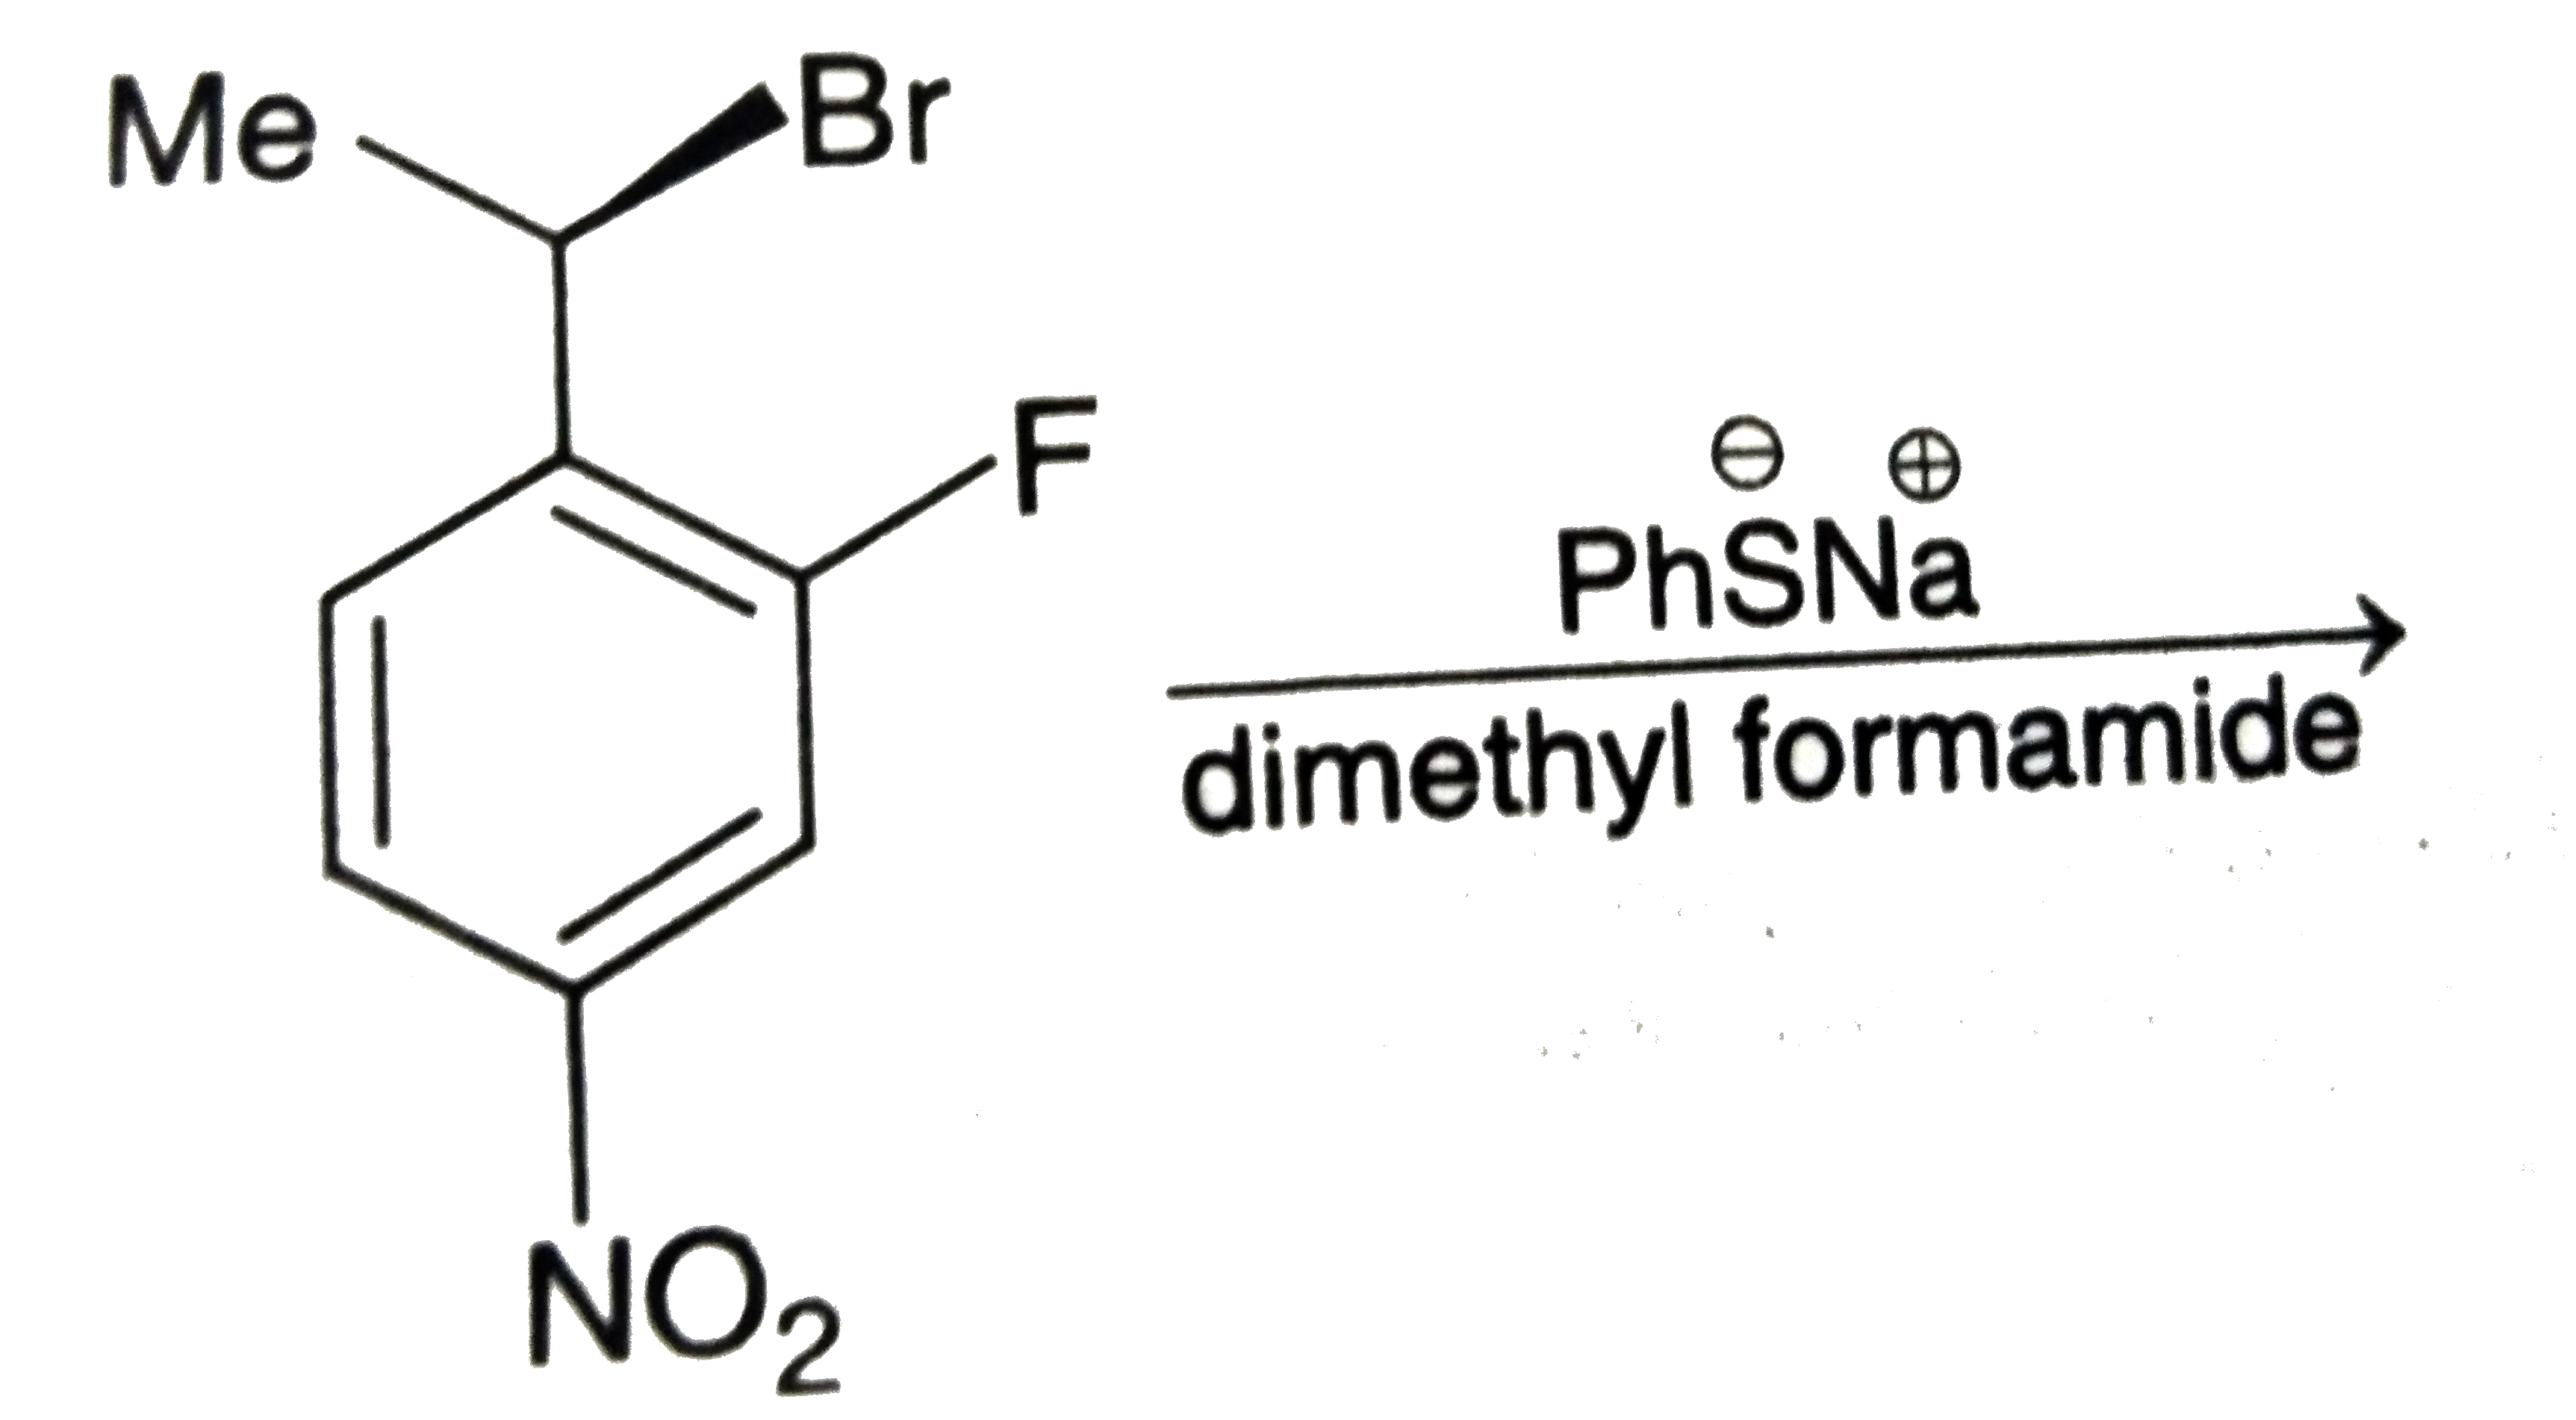 The major product of the following reaction is